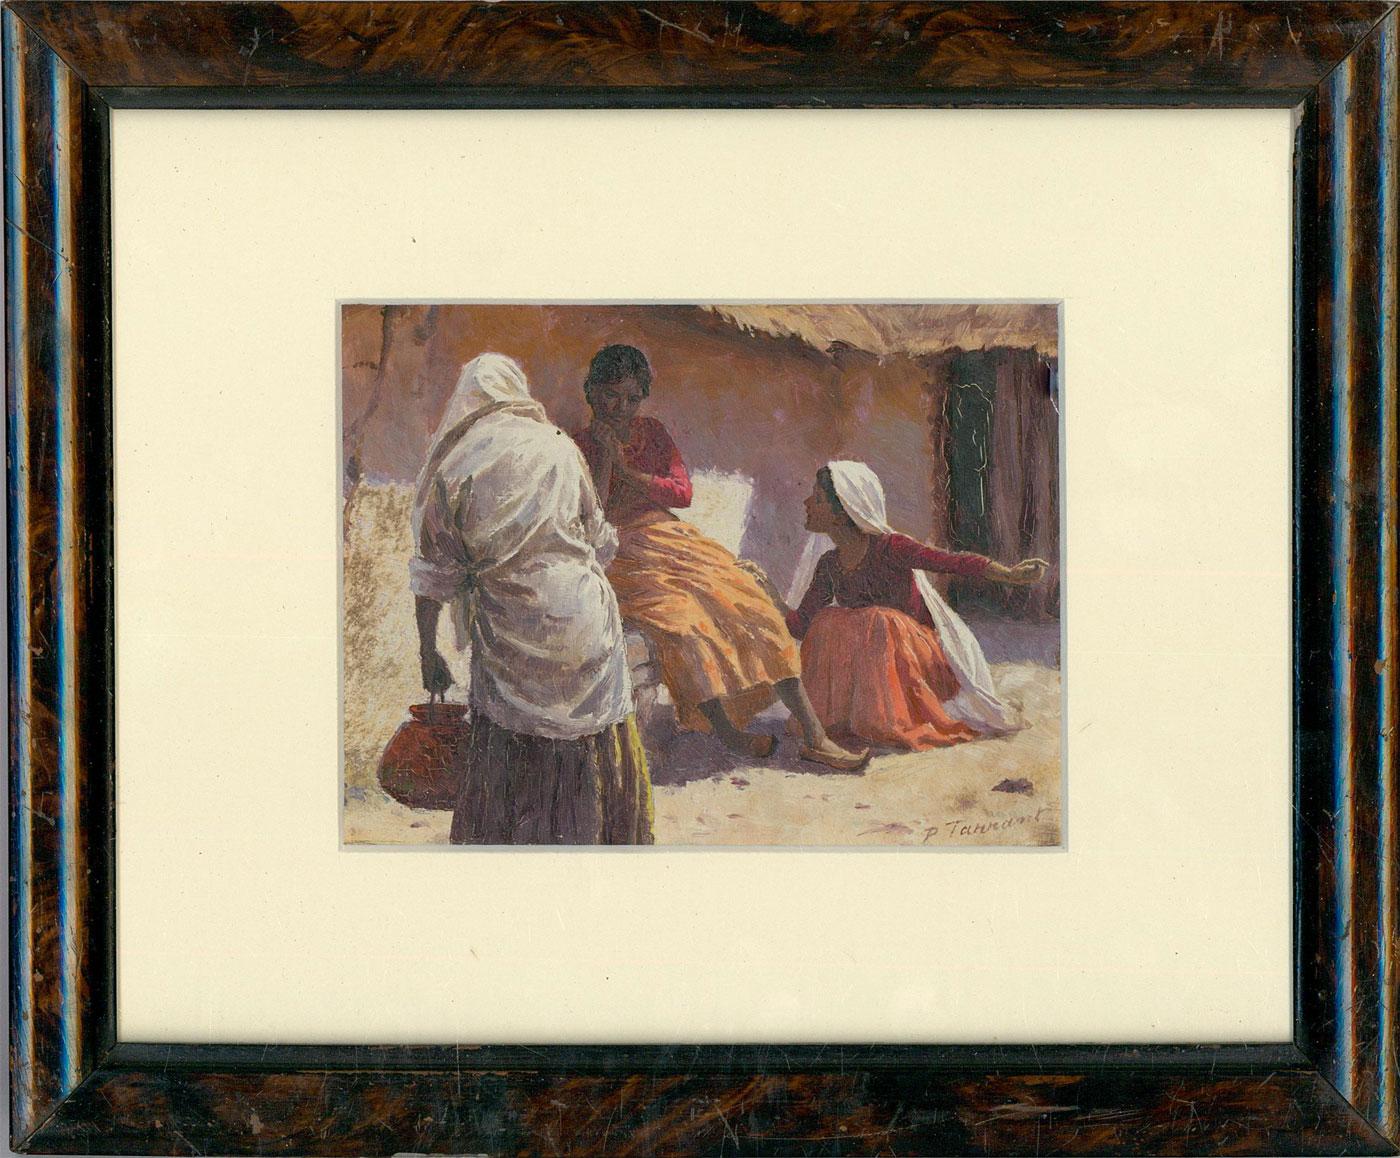 A charming oil study of a group of women outside of a hut. One woman appears to be comforting her friend who sites on a bench. Part of a pair of Eastern scenes. Signed to the lower right. Presented in a varnished wooden frame. On board.
